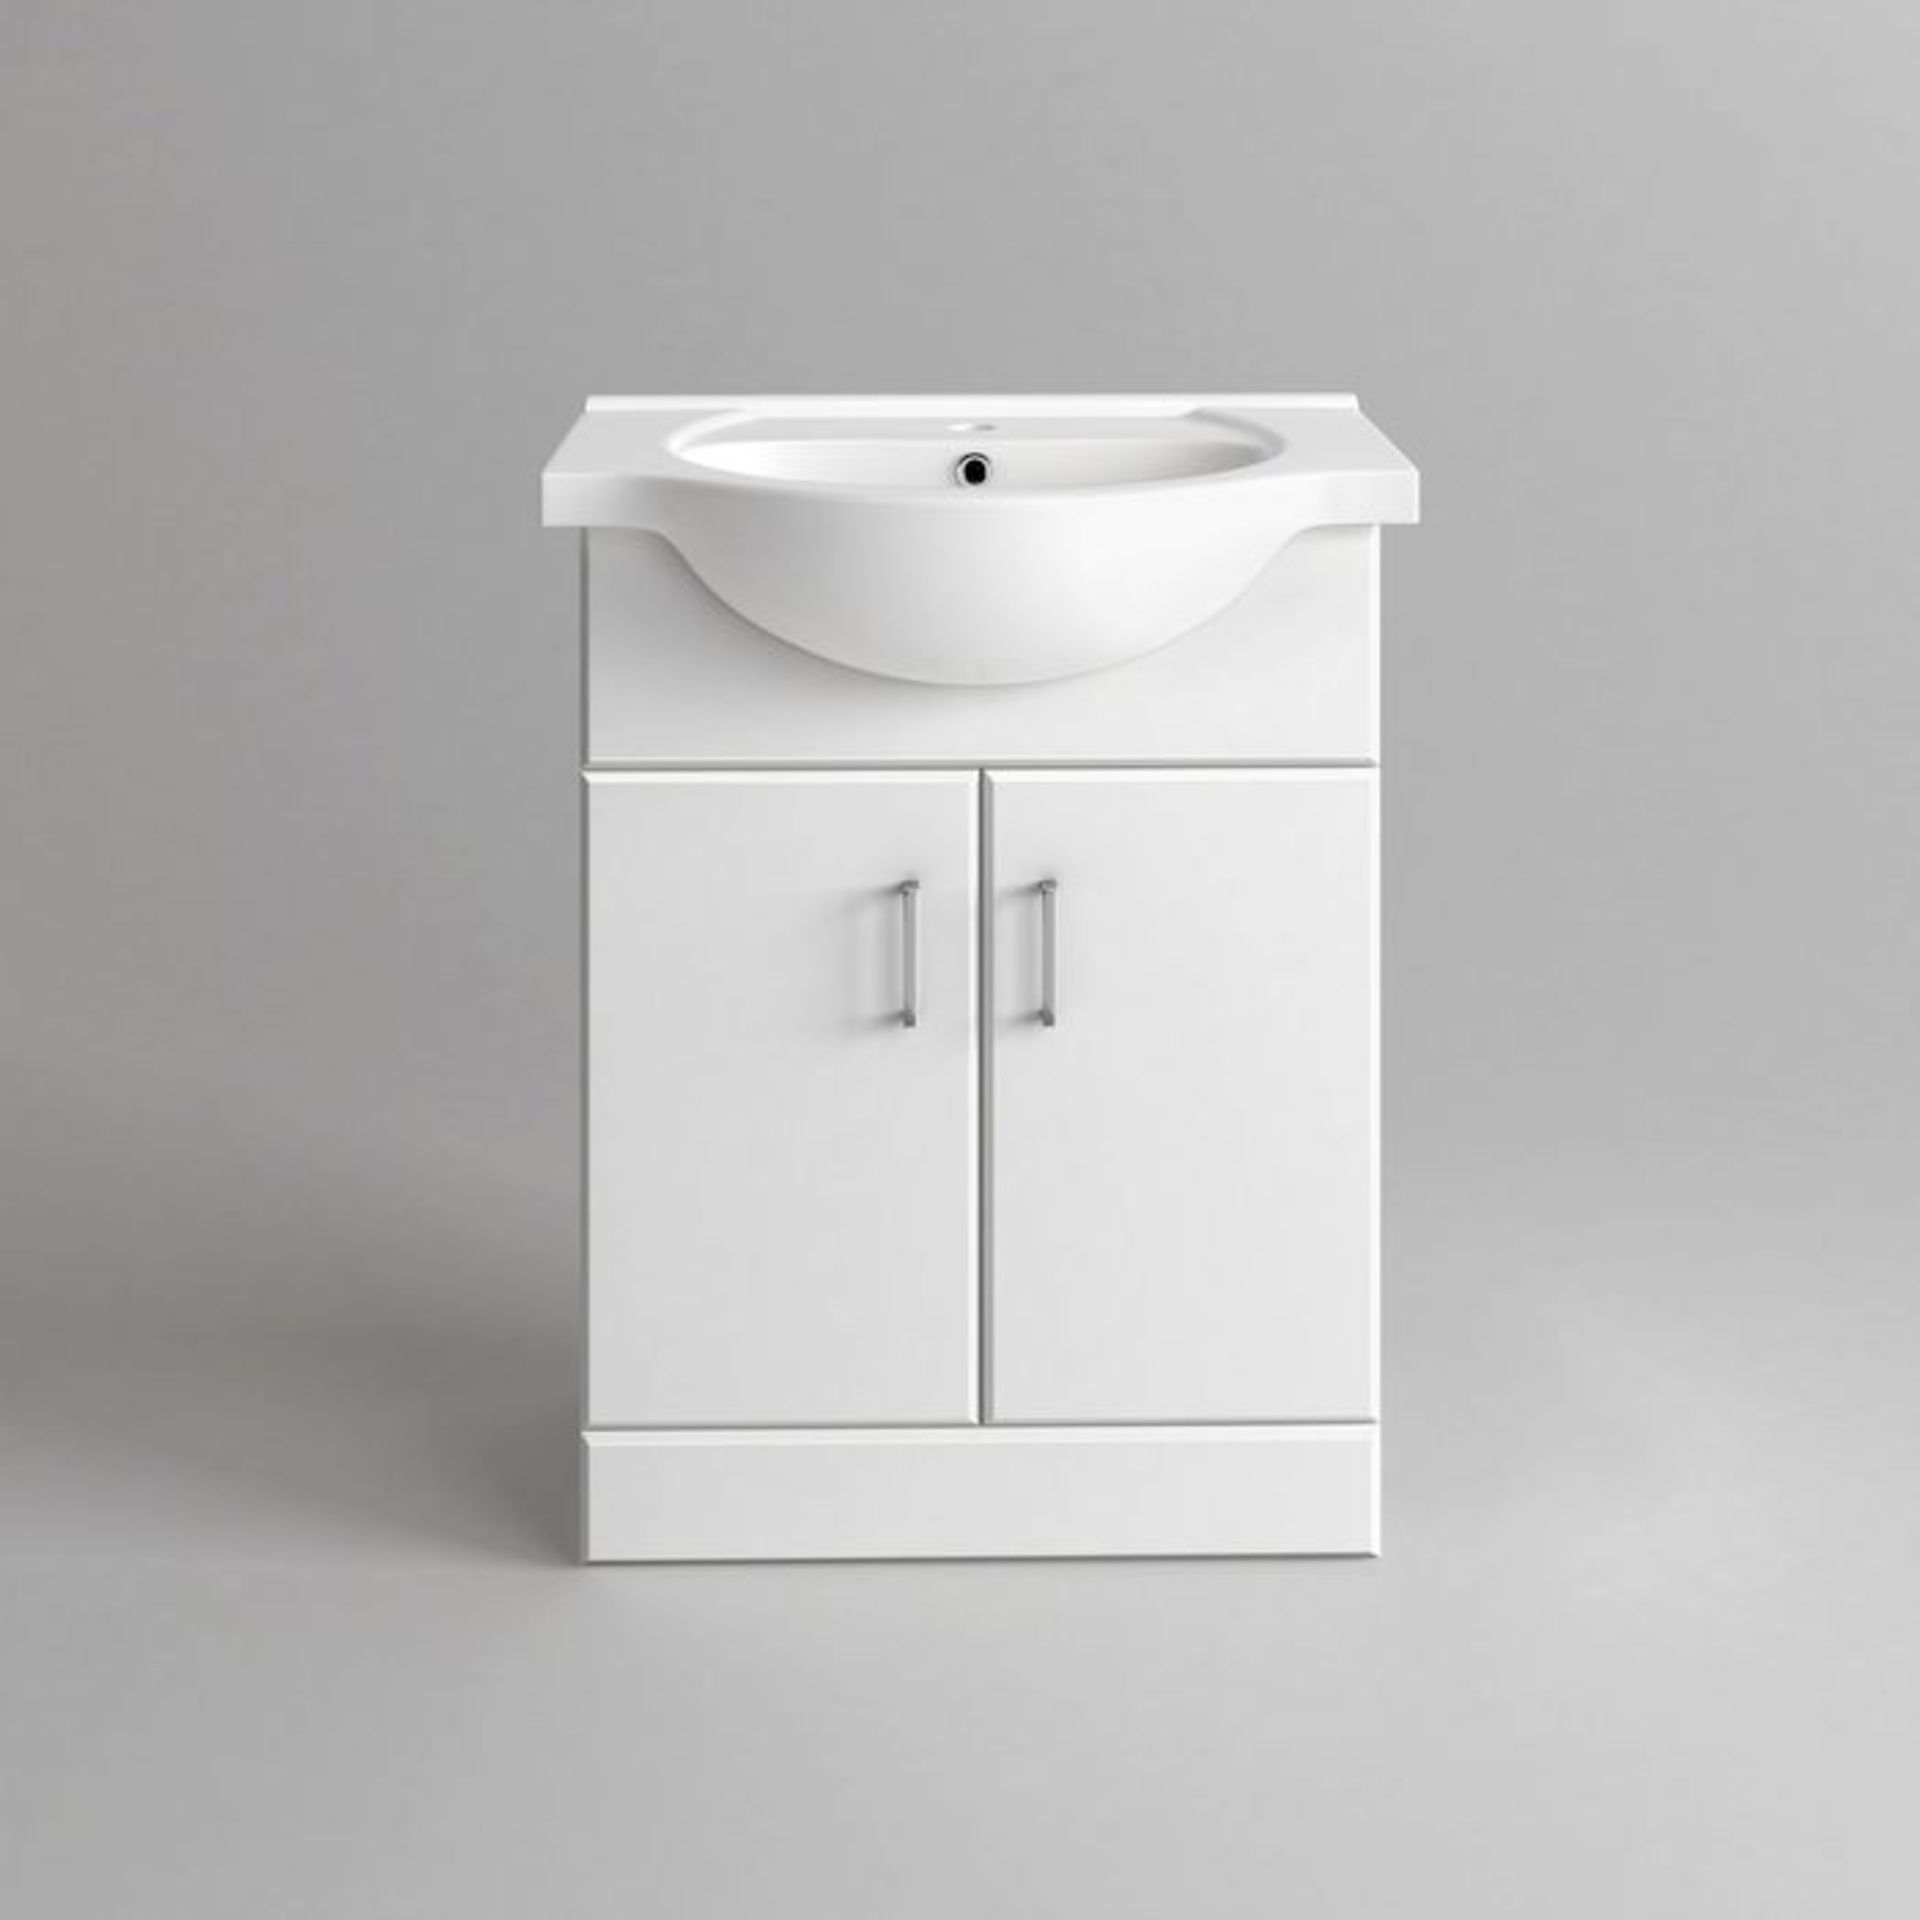 (YC50) 550x300mm Quartz Gloss White Built In Basin Cabinet. RRP £349.99. Comes complete with - Image 4 of 4